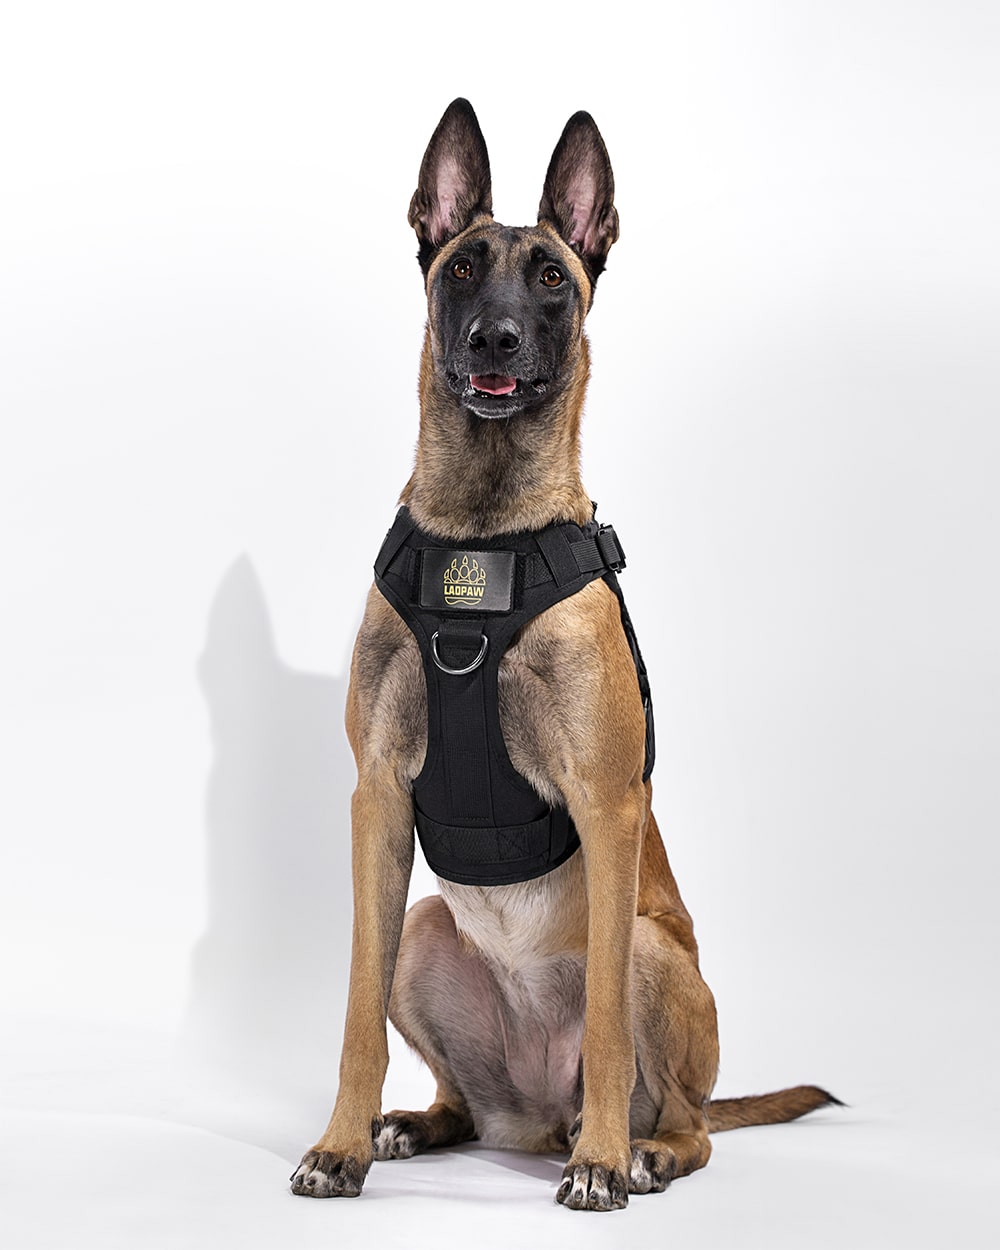 The Best Tctical No Pull Dog Harness & K9 Harness/Vest 2023